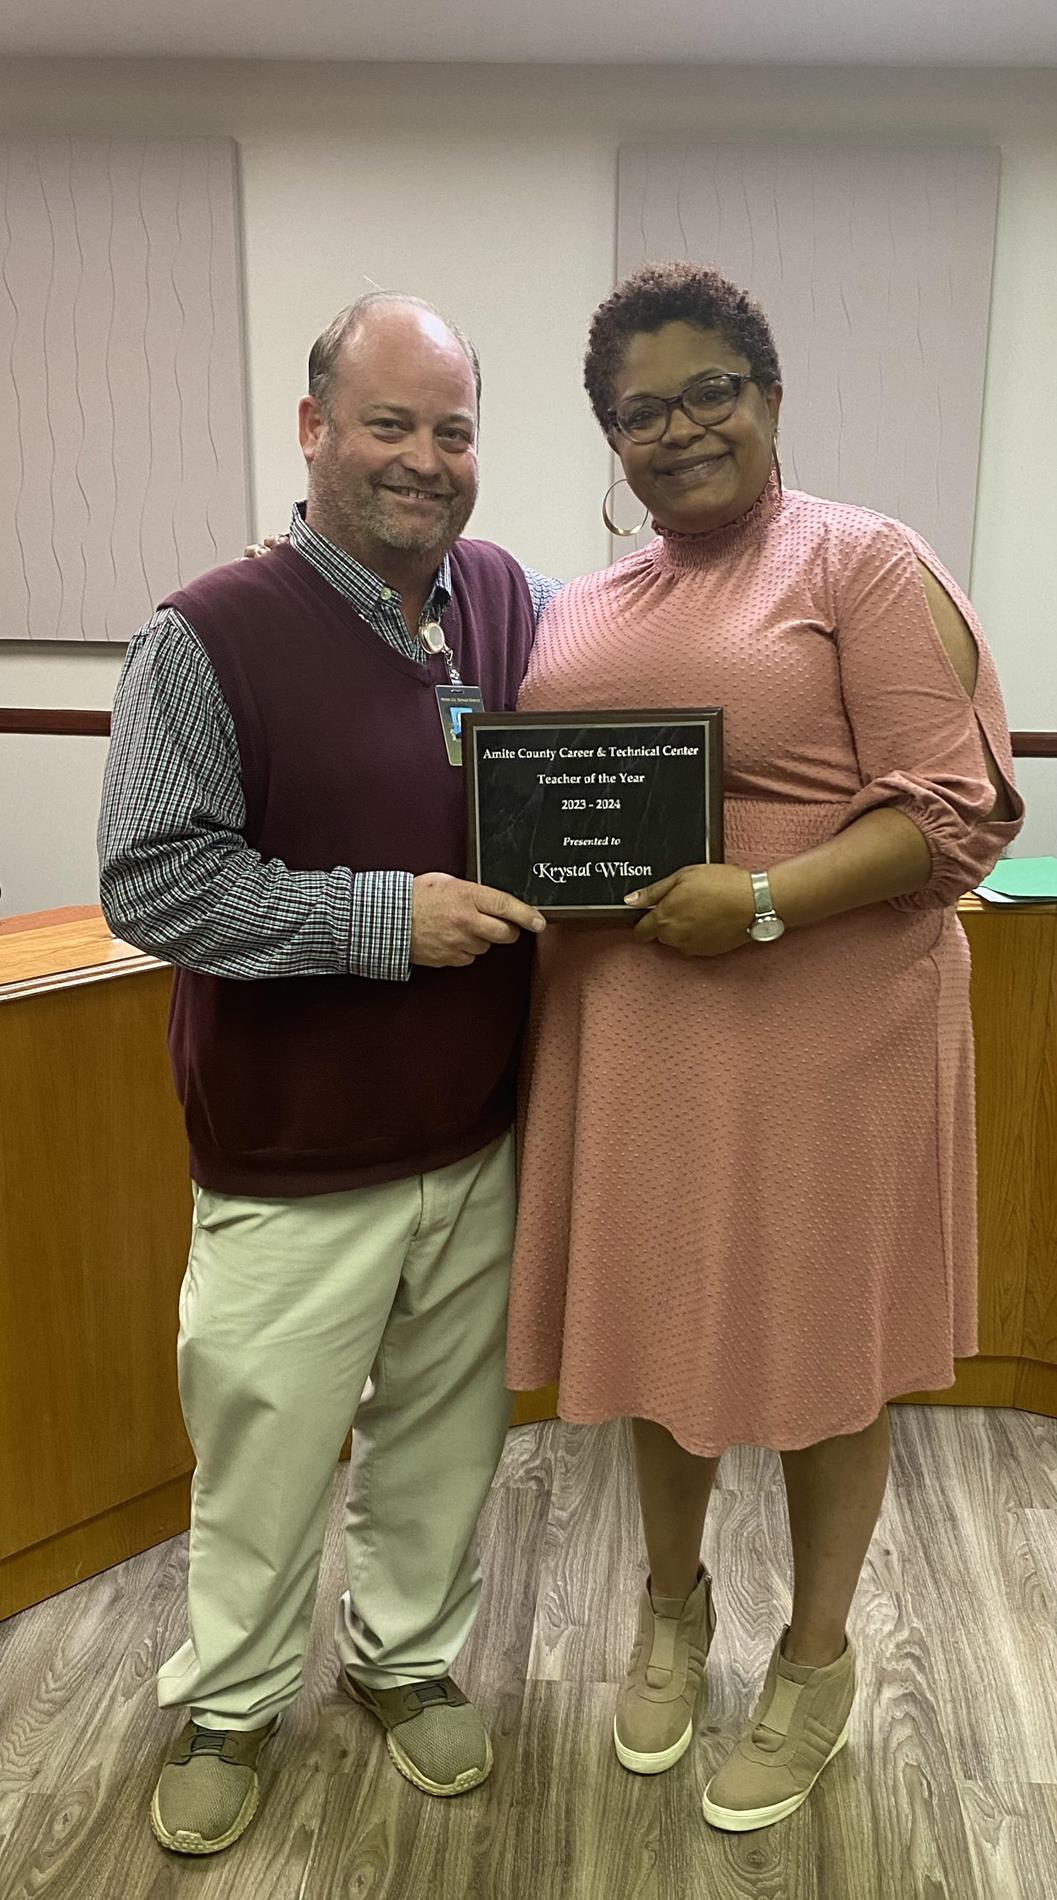 Amite County CTE Teacher of the Year - pictured CTE Principal, Neal Smith and CTE Teacher of the Year, Krystal Wilson